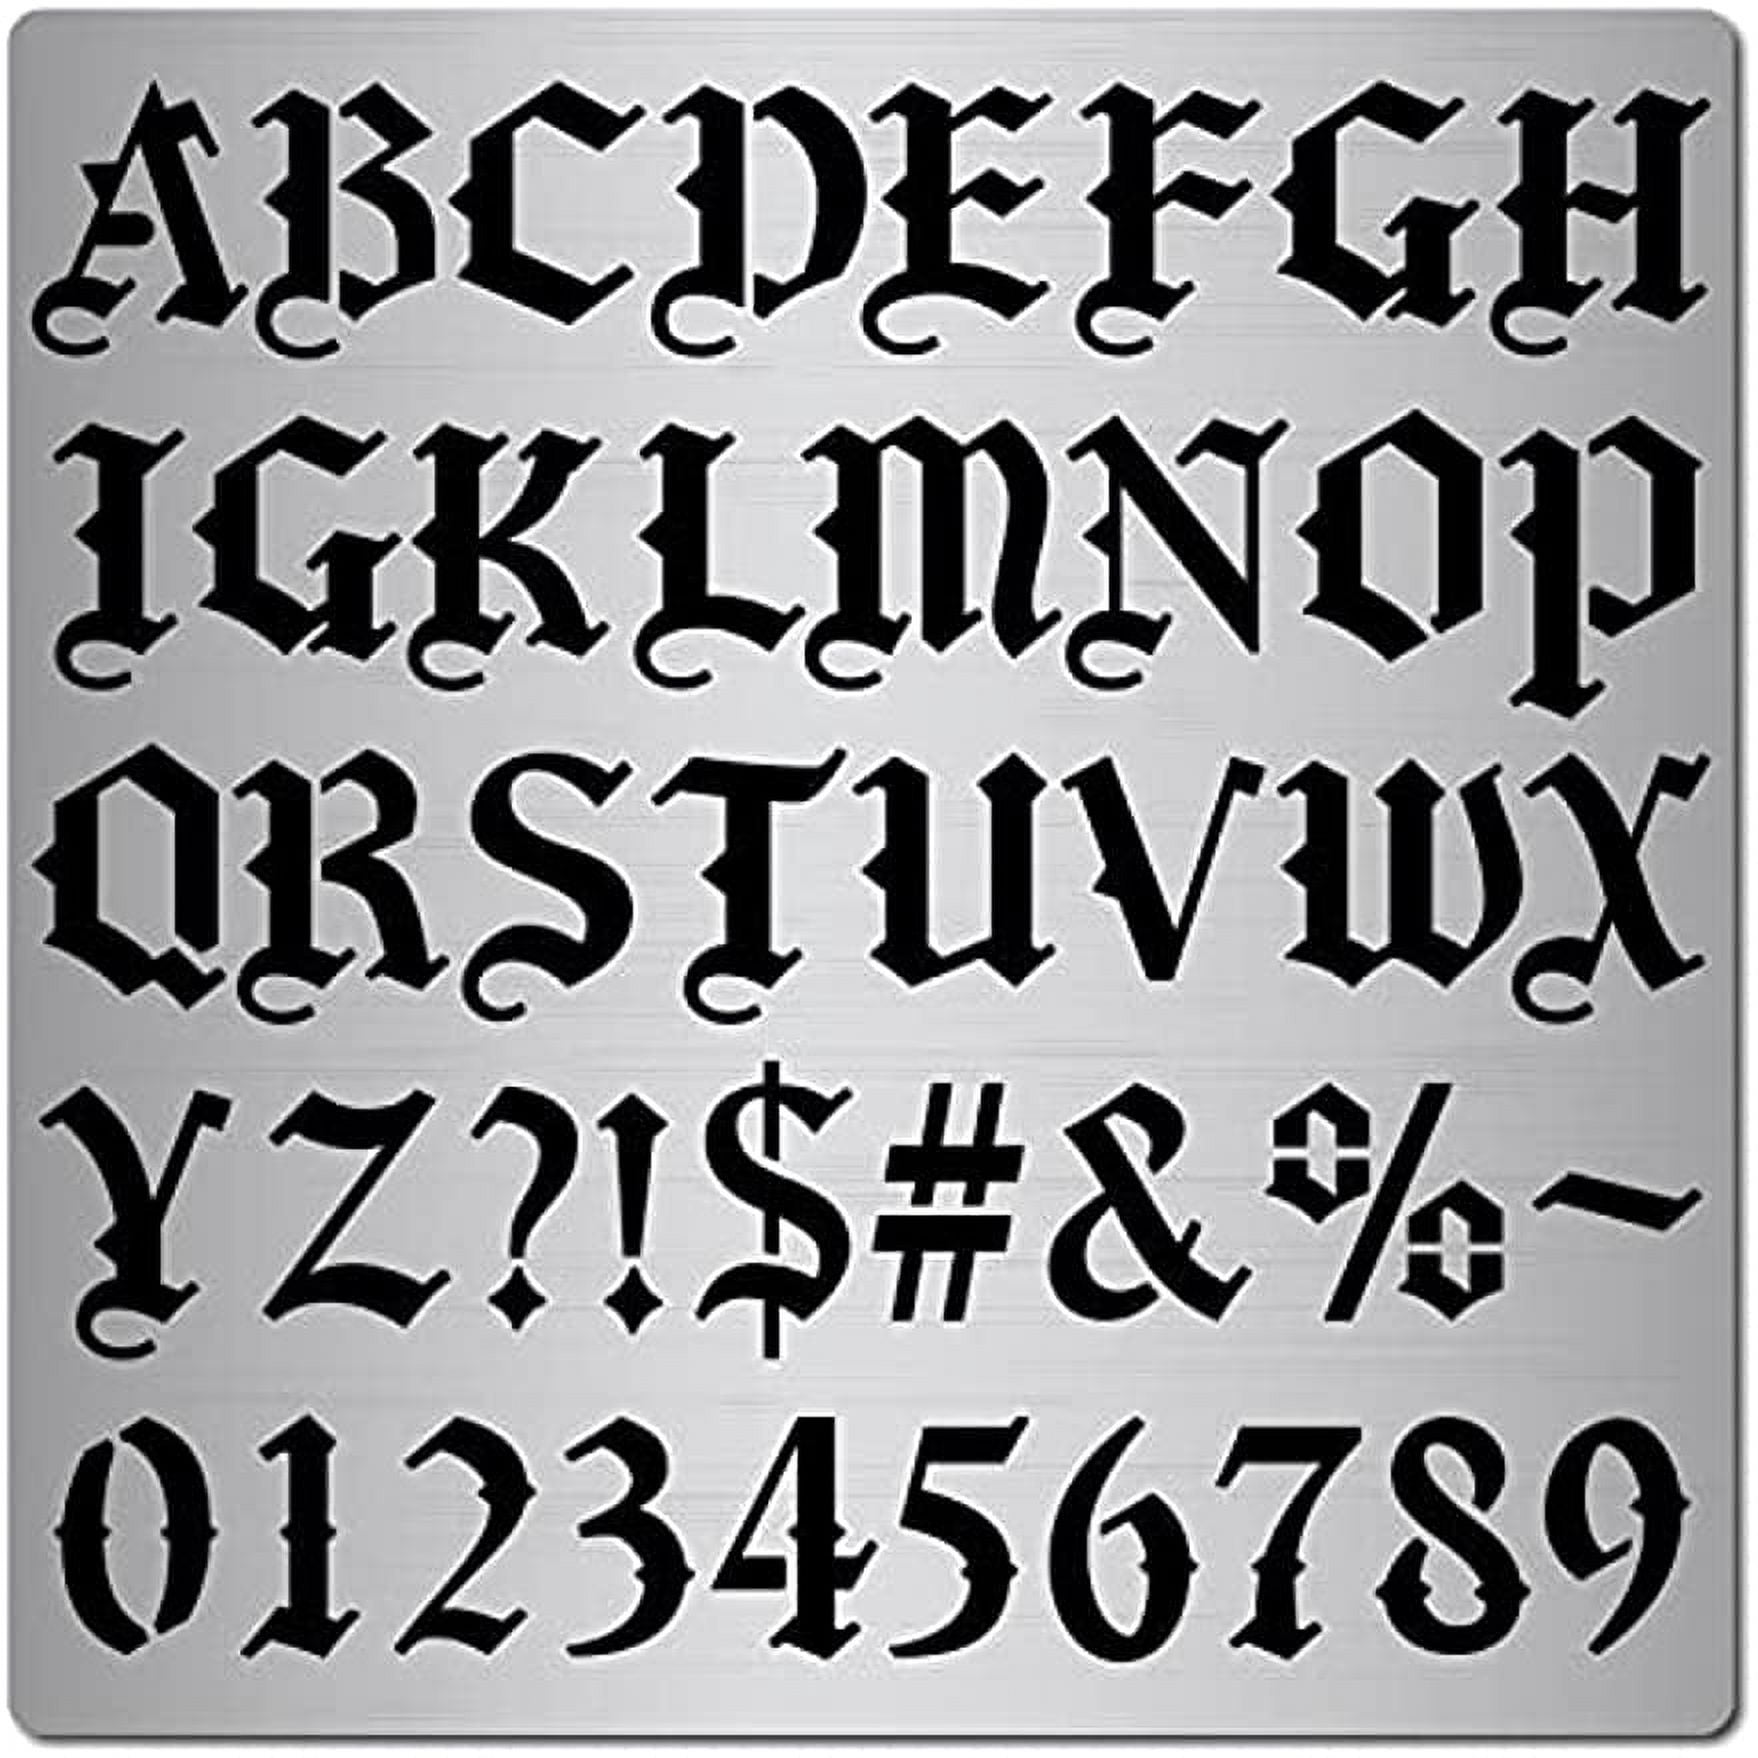 36 Pcs calligraphy letter numbers template Small Letter Stencils Crafts